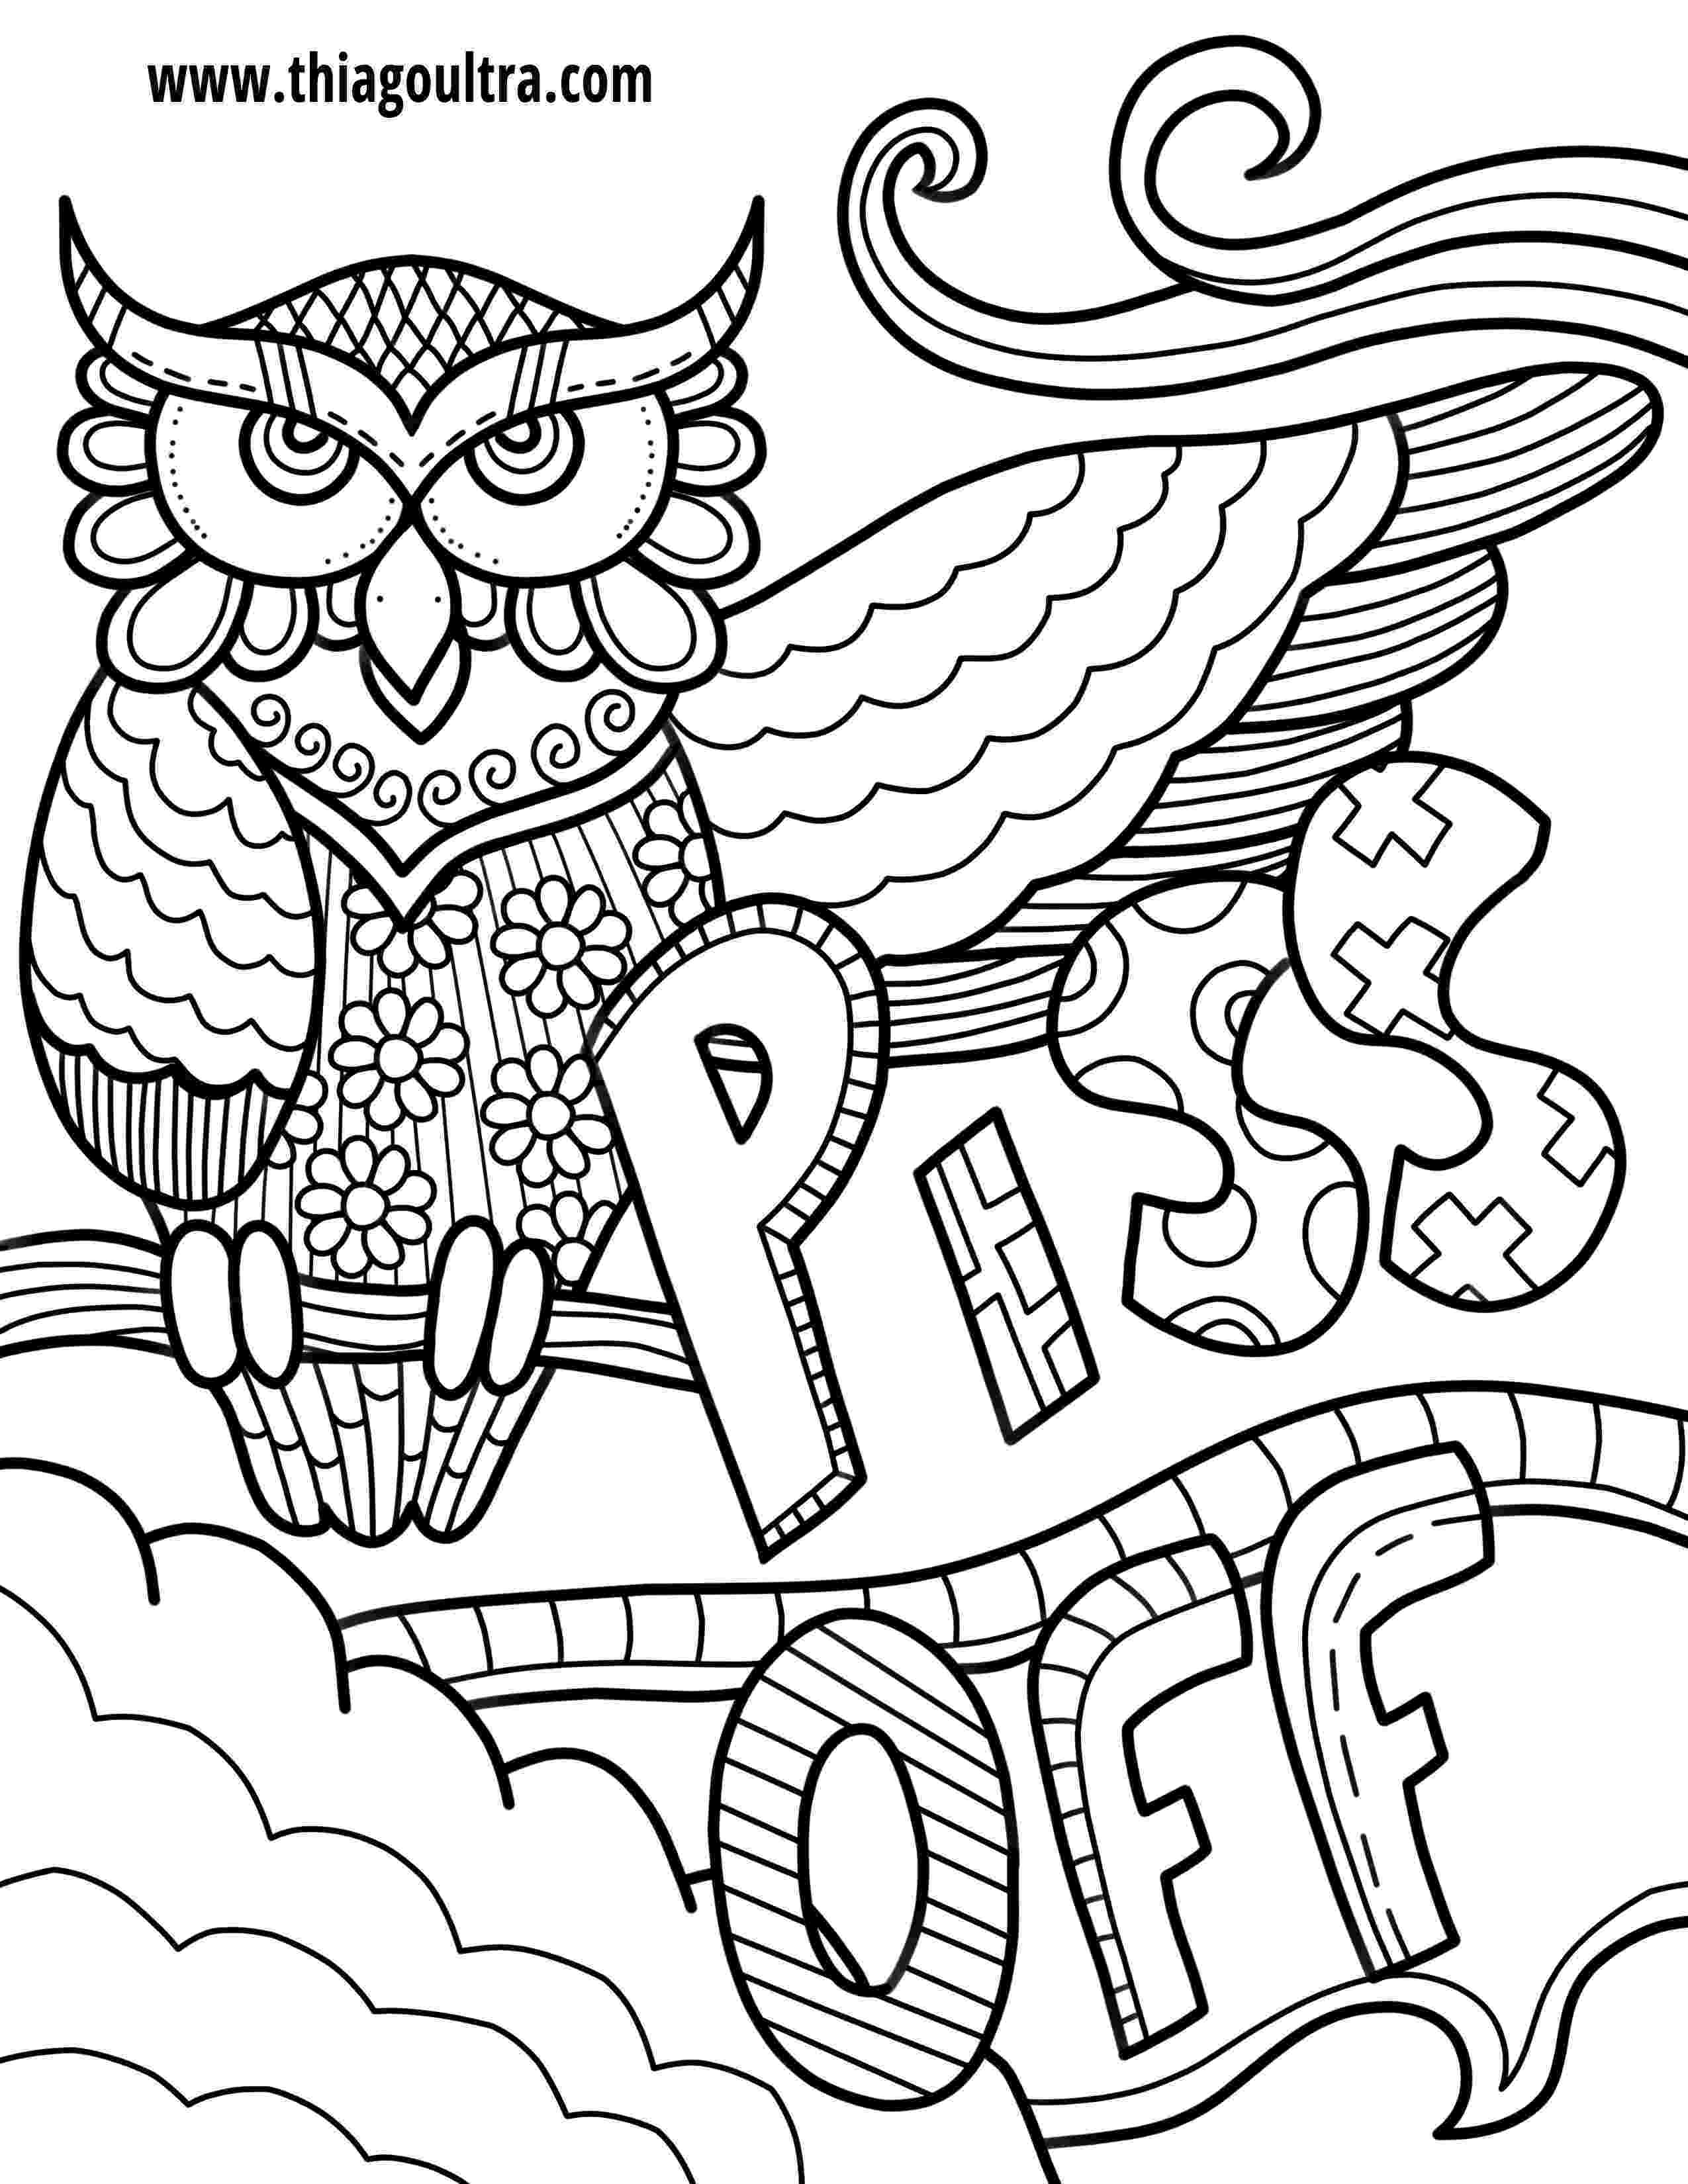 free online coloring pages for adults swear words httpswwwfacebookcomgroupsswearywords swear words online adults coloring words pages swear free for 